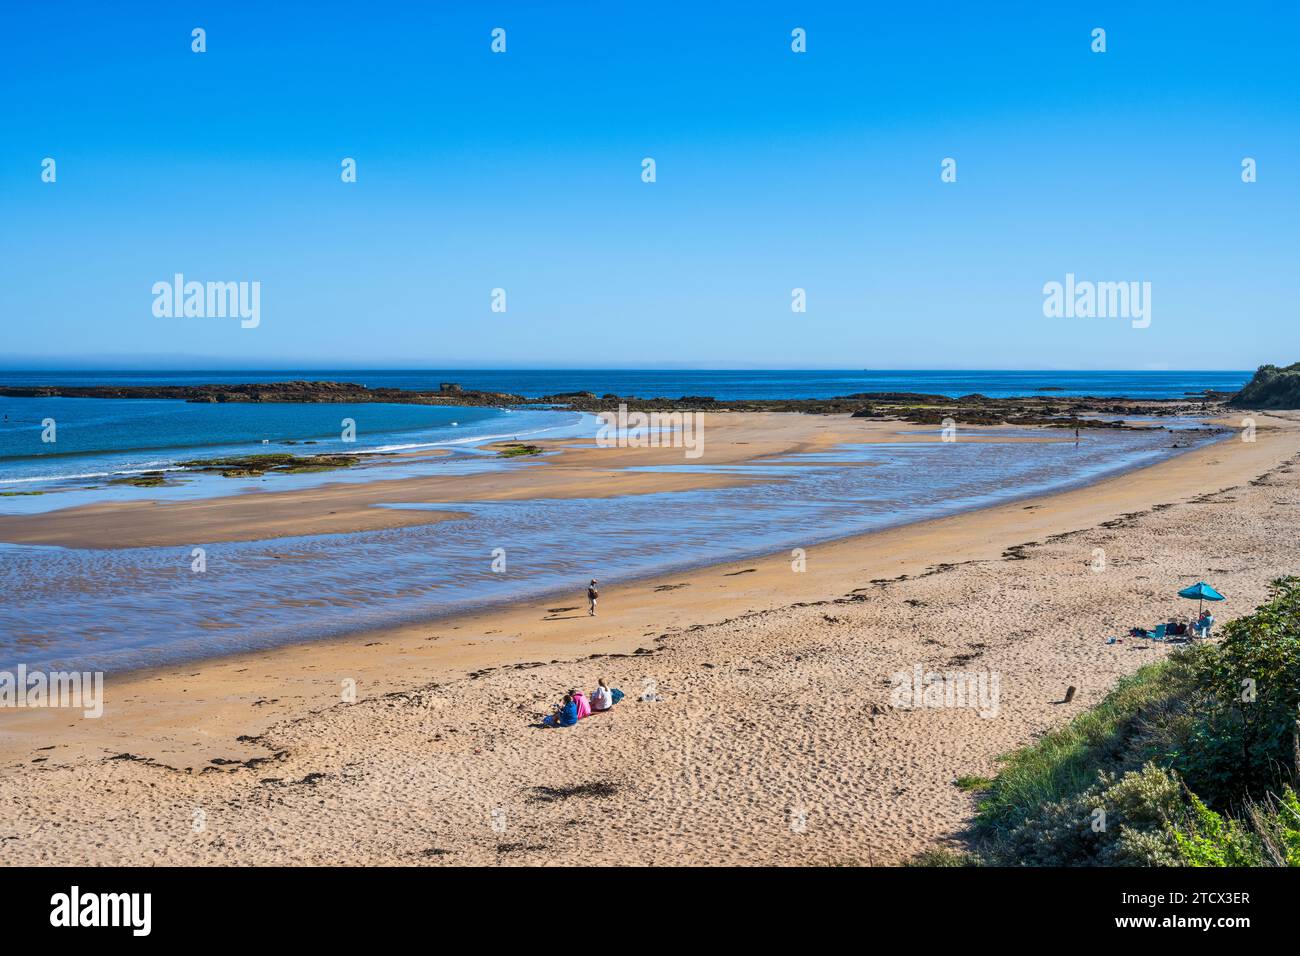 View looking east across the golden sands of Seacliff Beach, East Lothian Coast, Scotland, UK Stock Photo